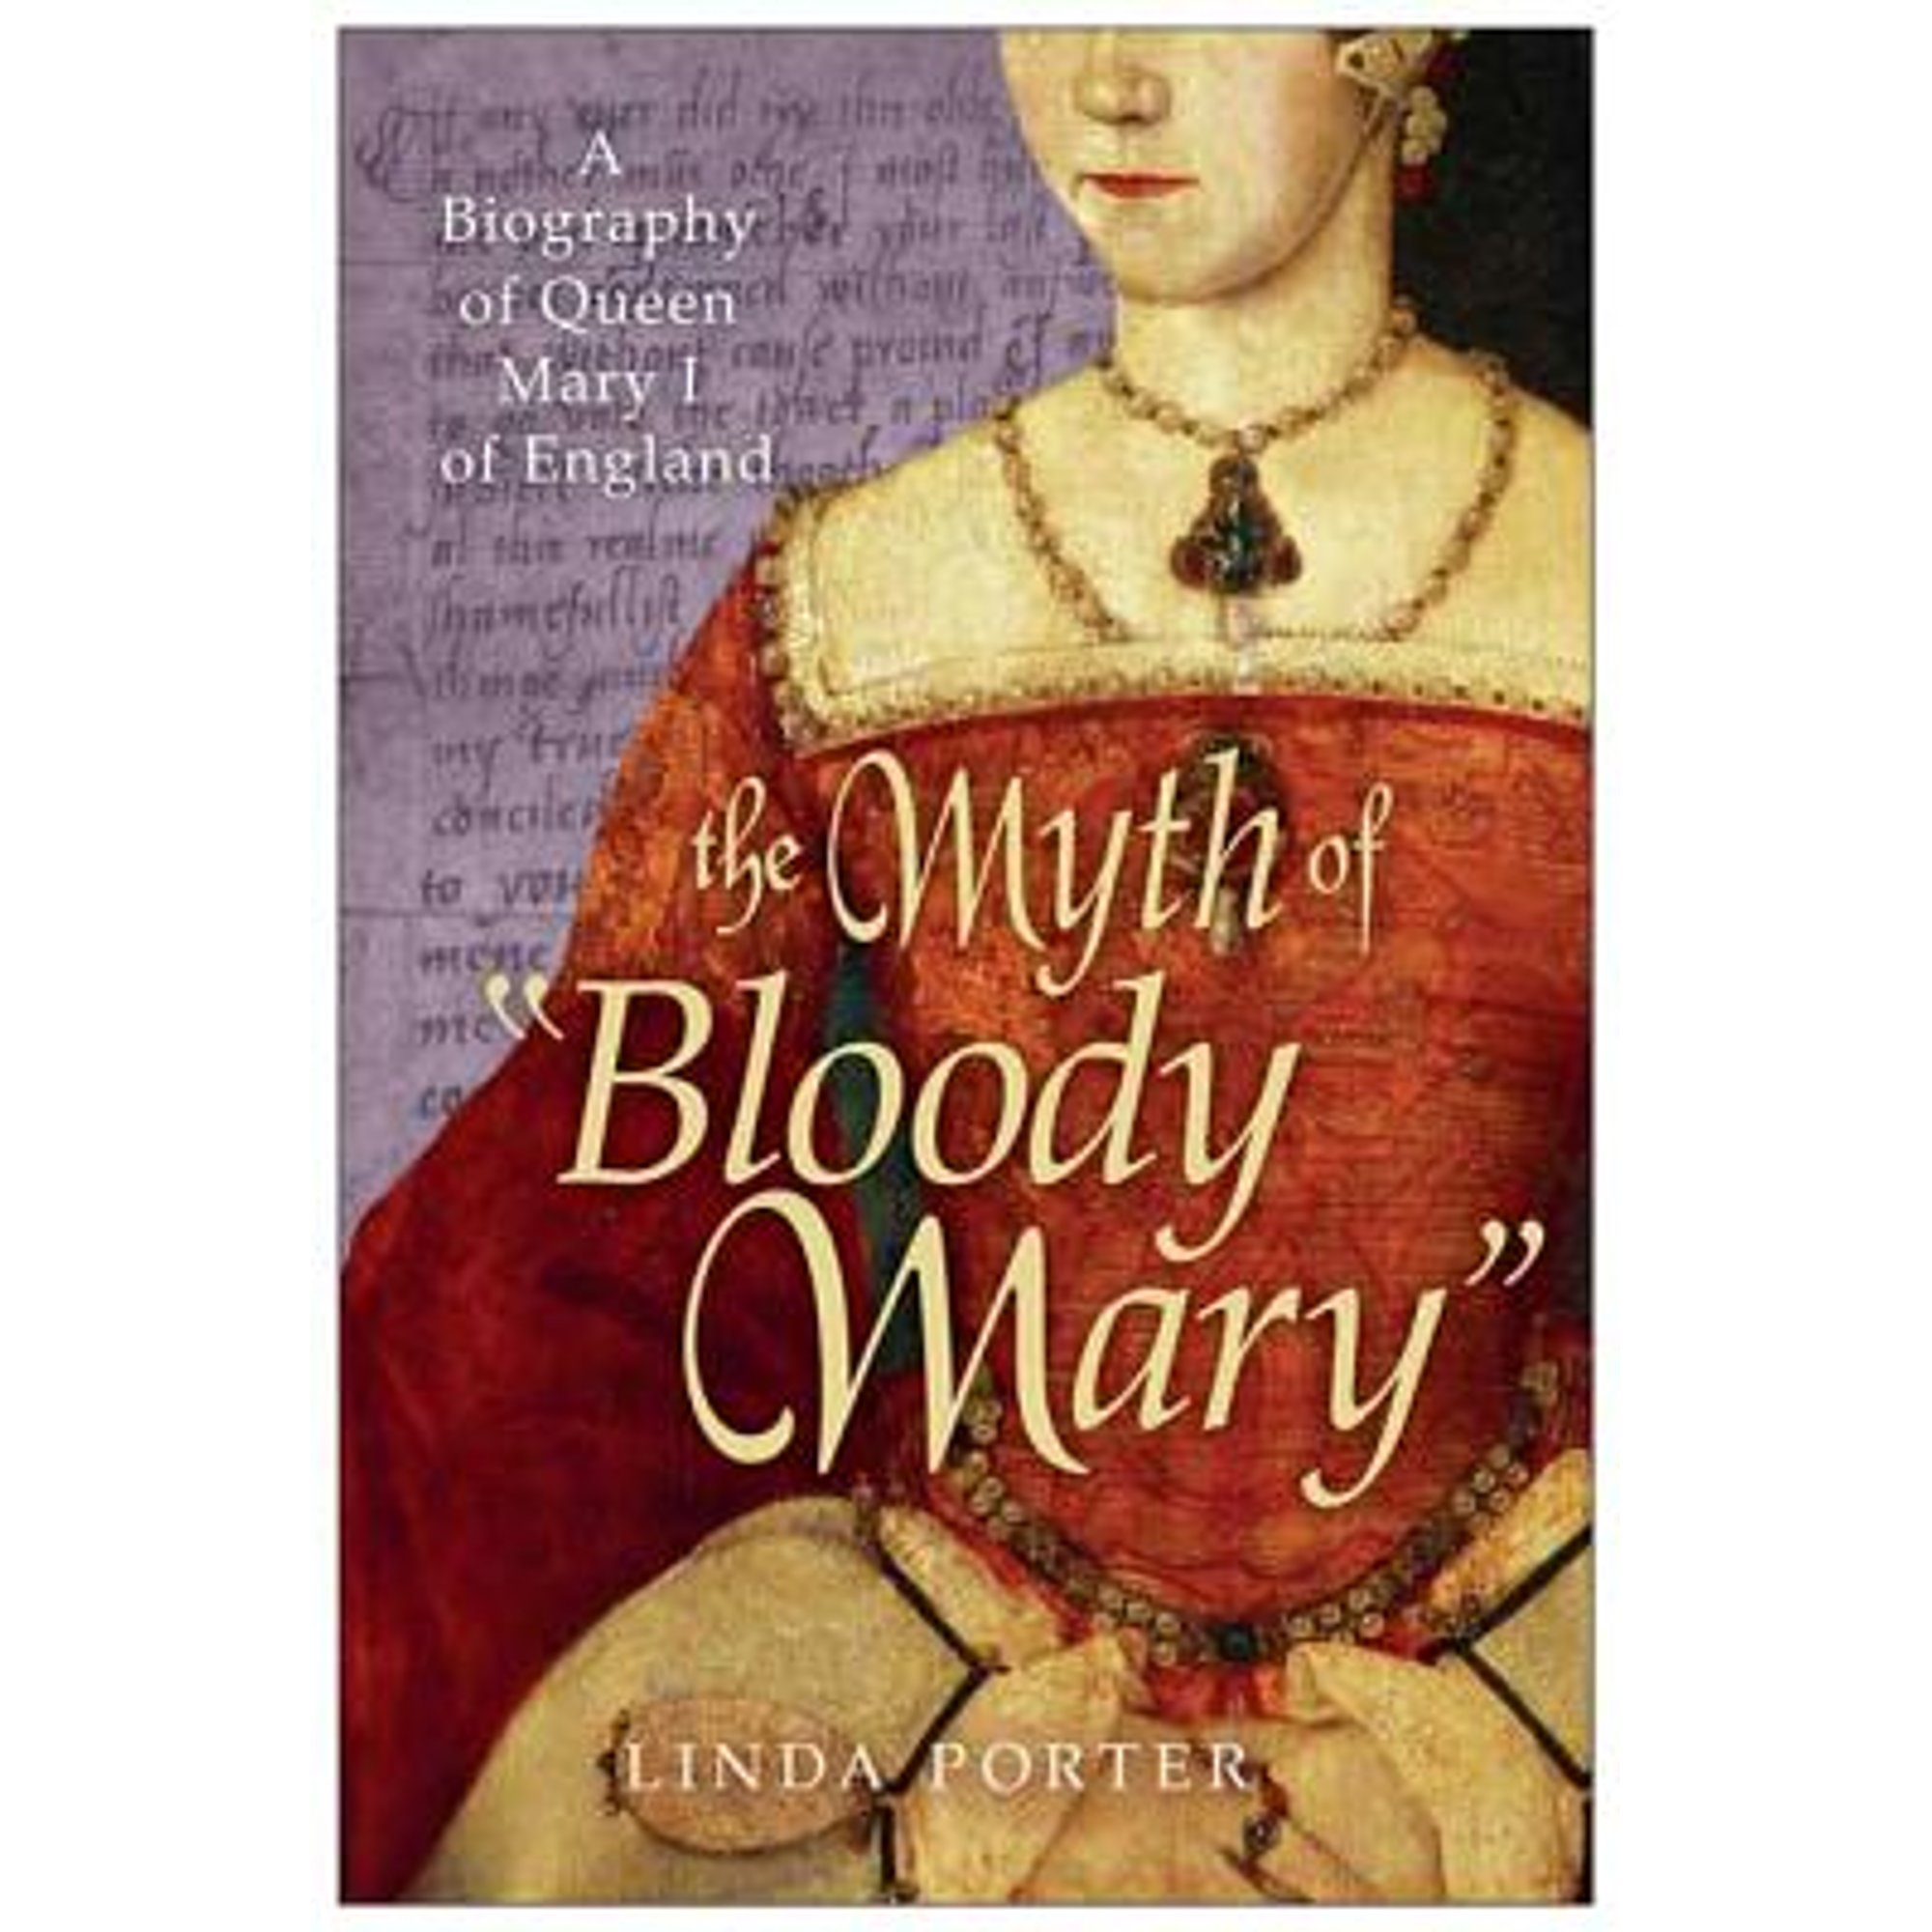 The Myth of "Bloody Mary": A Biography of Queen Mary I of England (Paperback) by Linda Porter - image 1 of 1